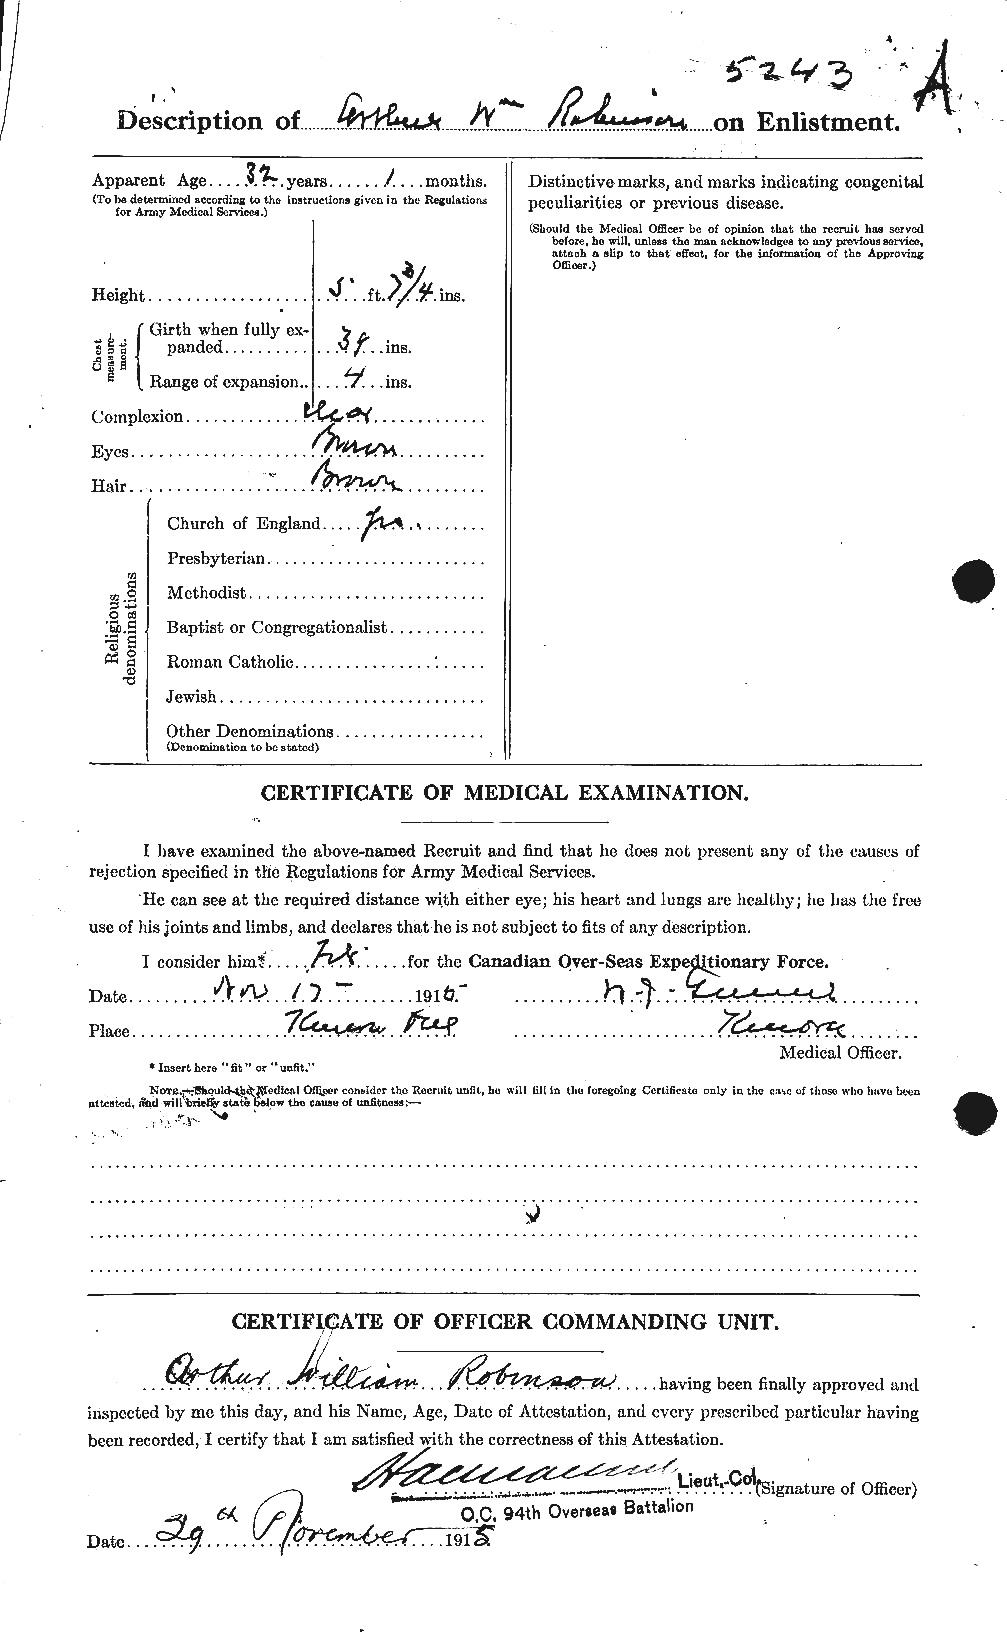 Personnel Records of the First World War - CEF 607010b